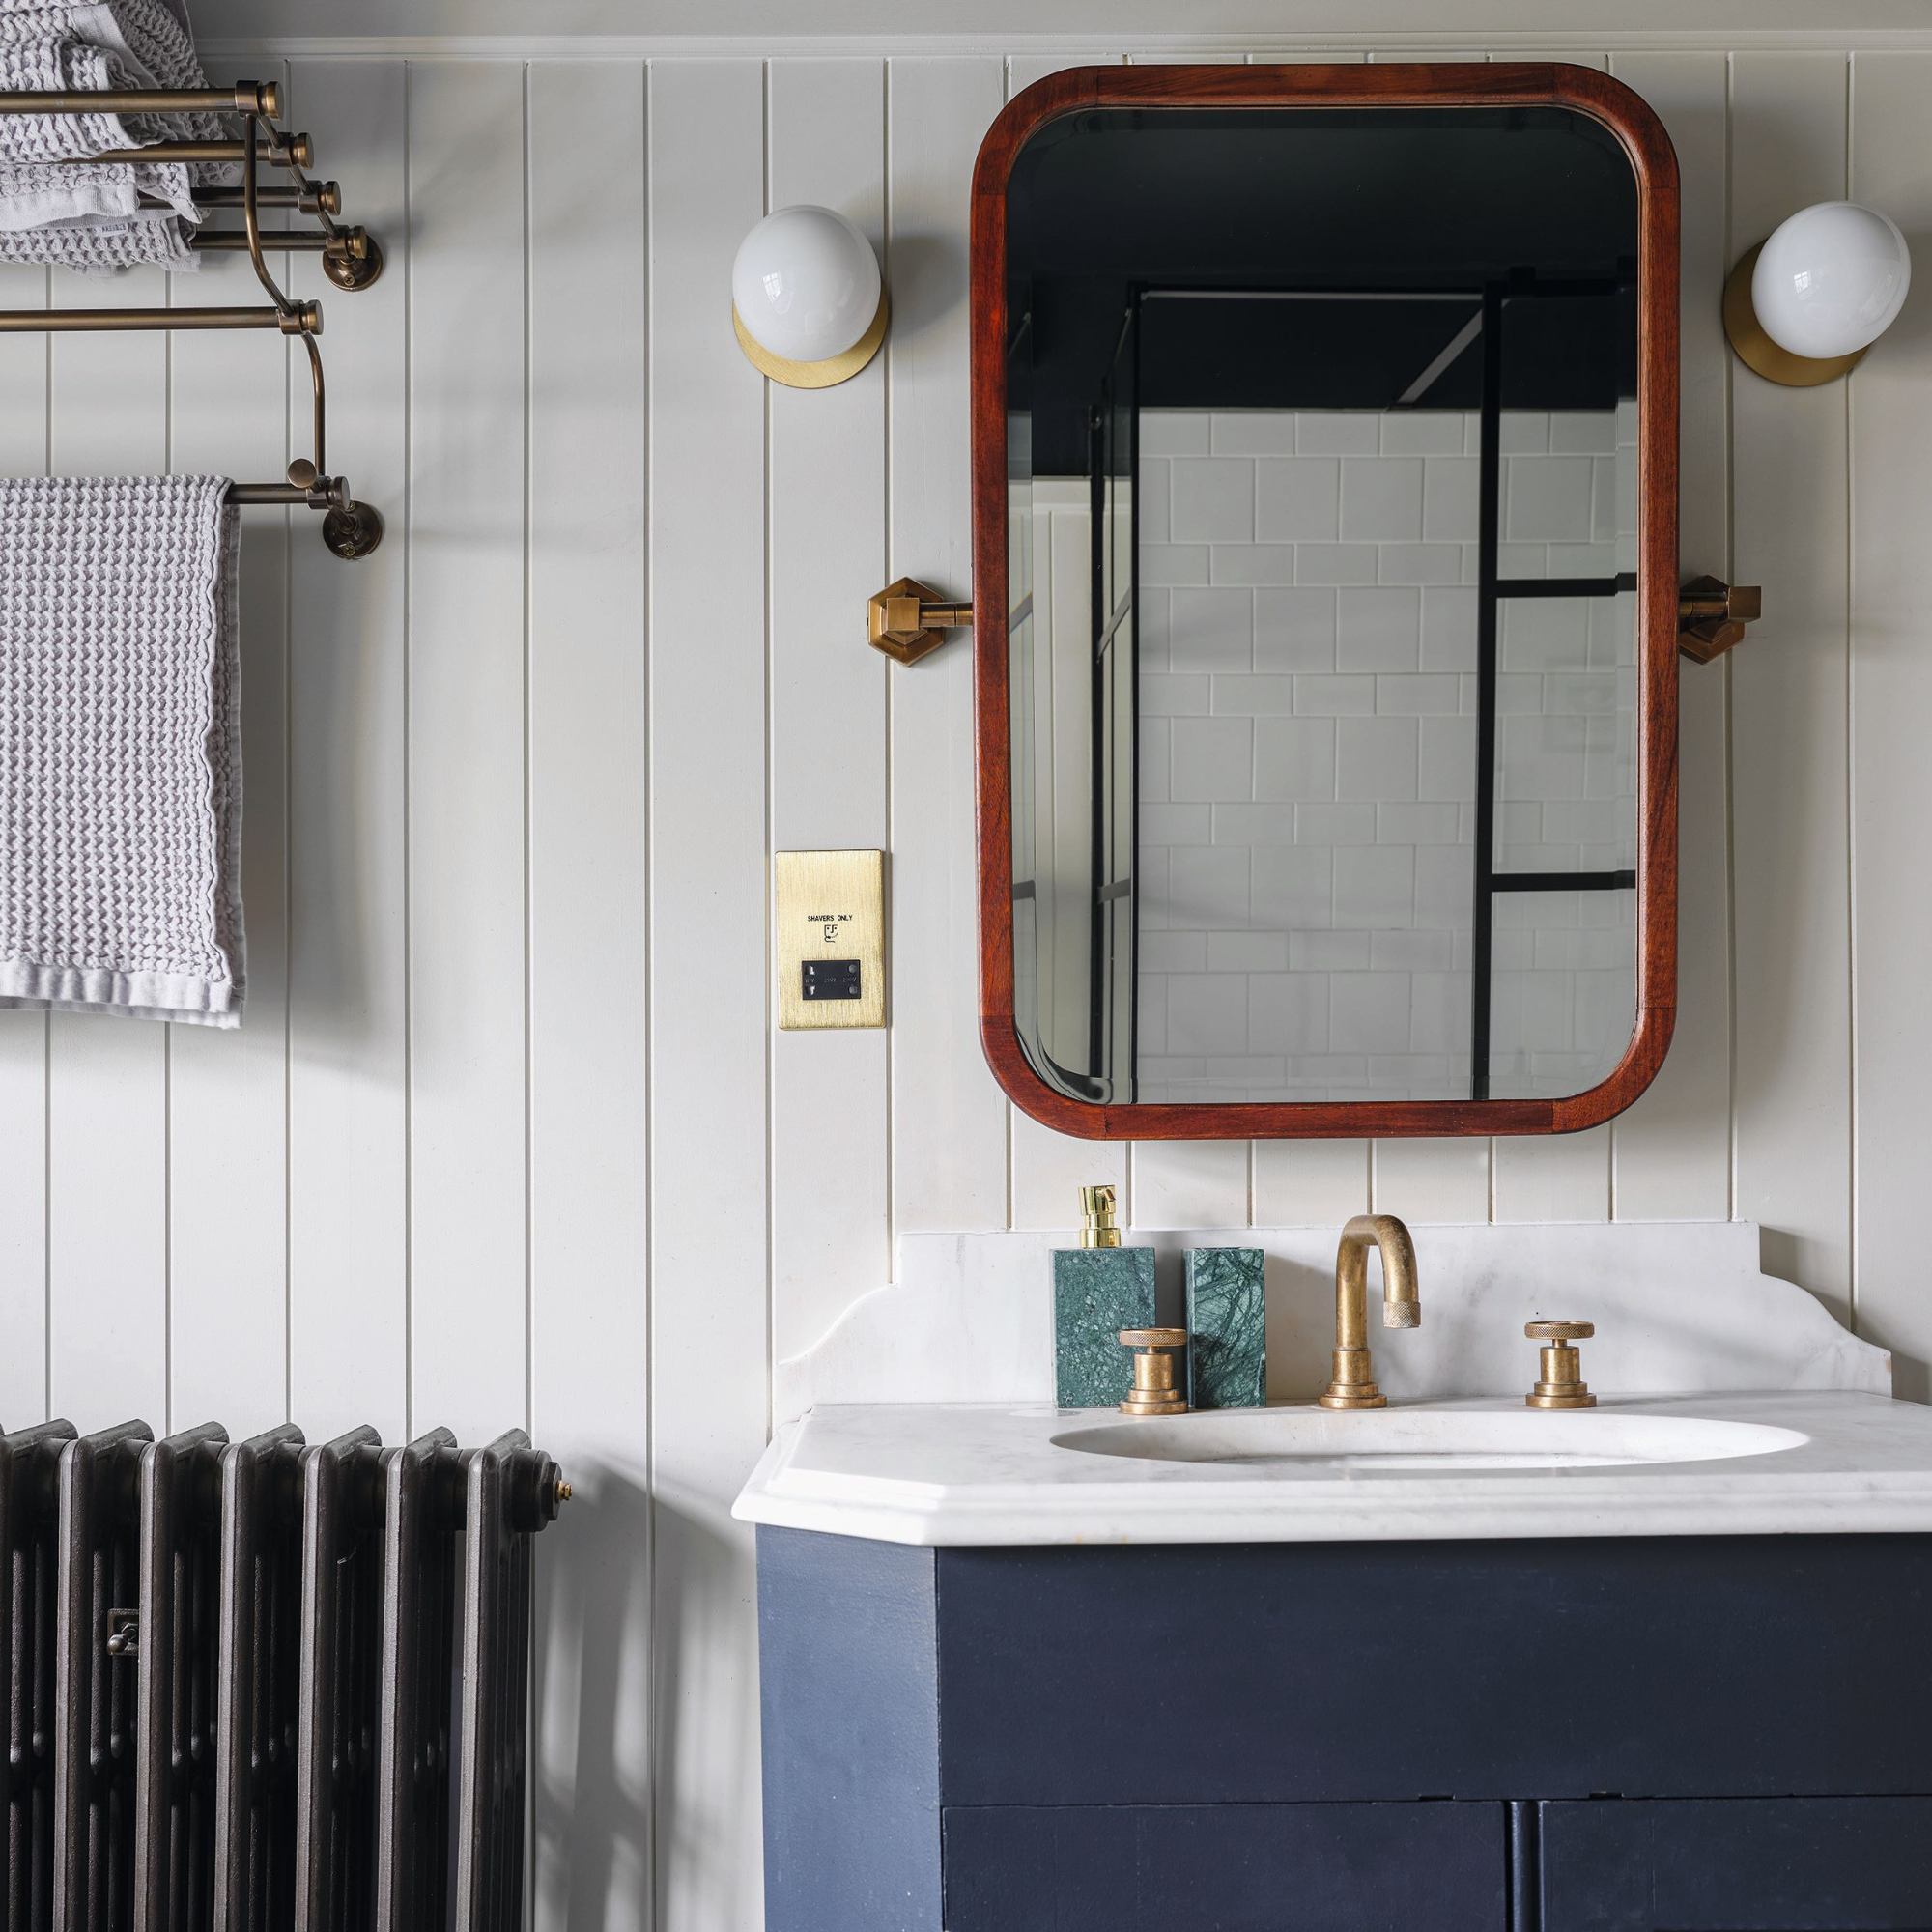 Handbasin with white and grey marbled top, blue vanity unit, wood panelled wall and original cast iron radiator